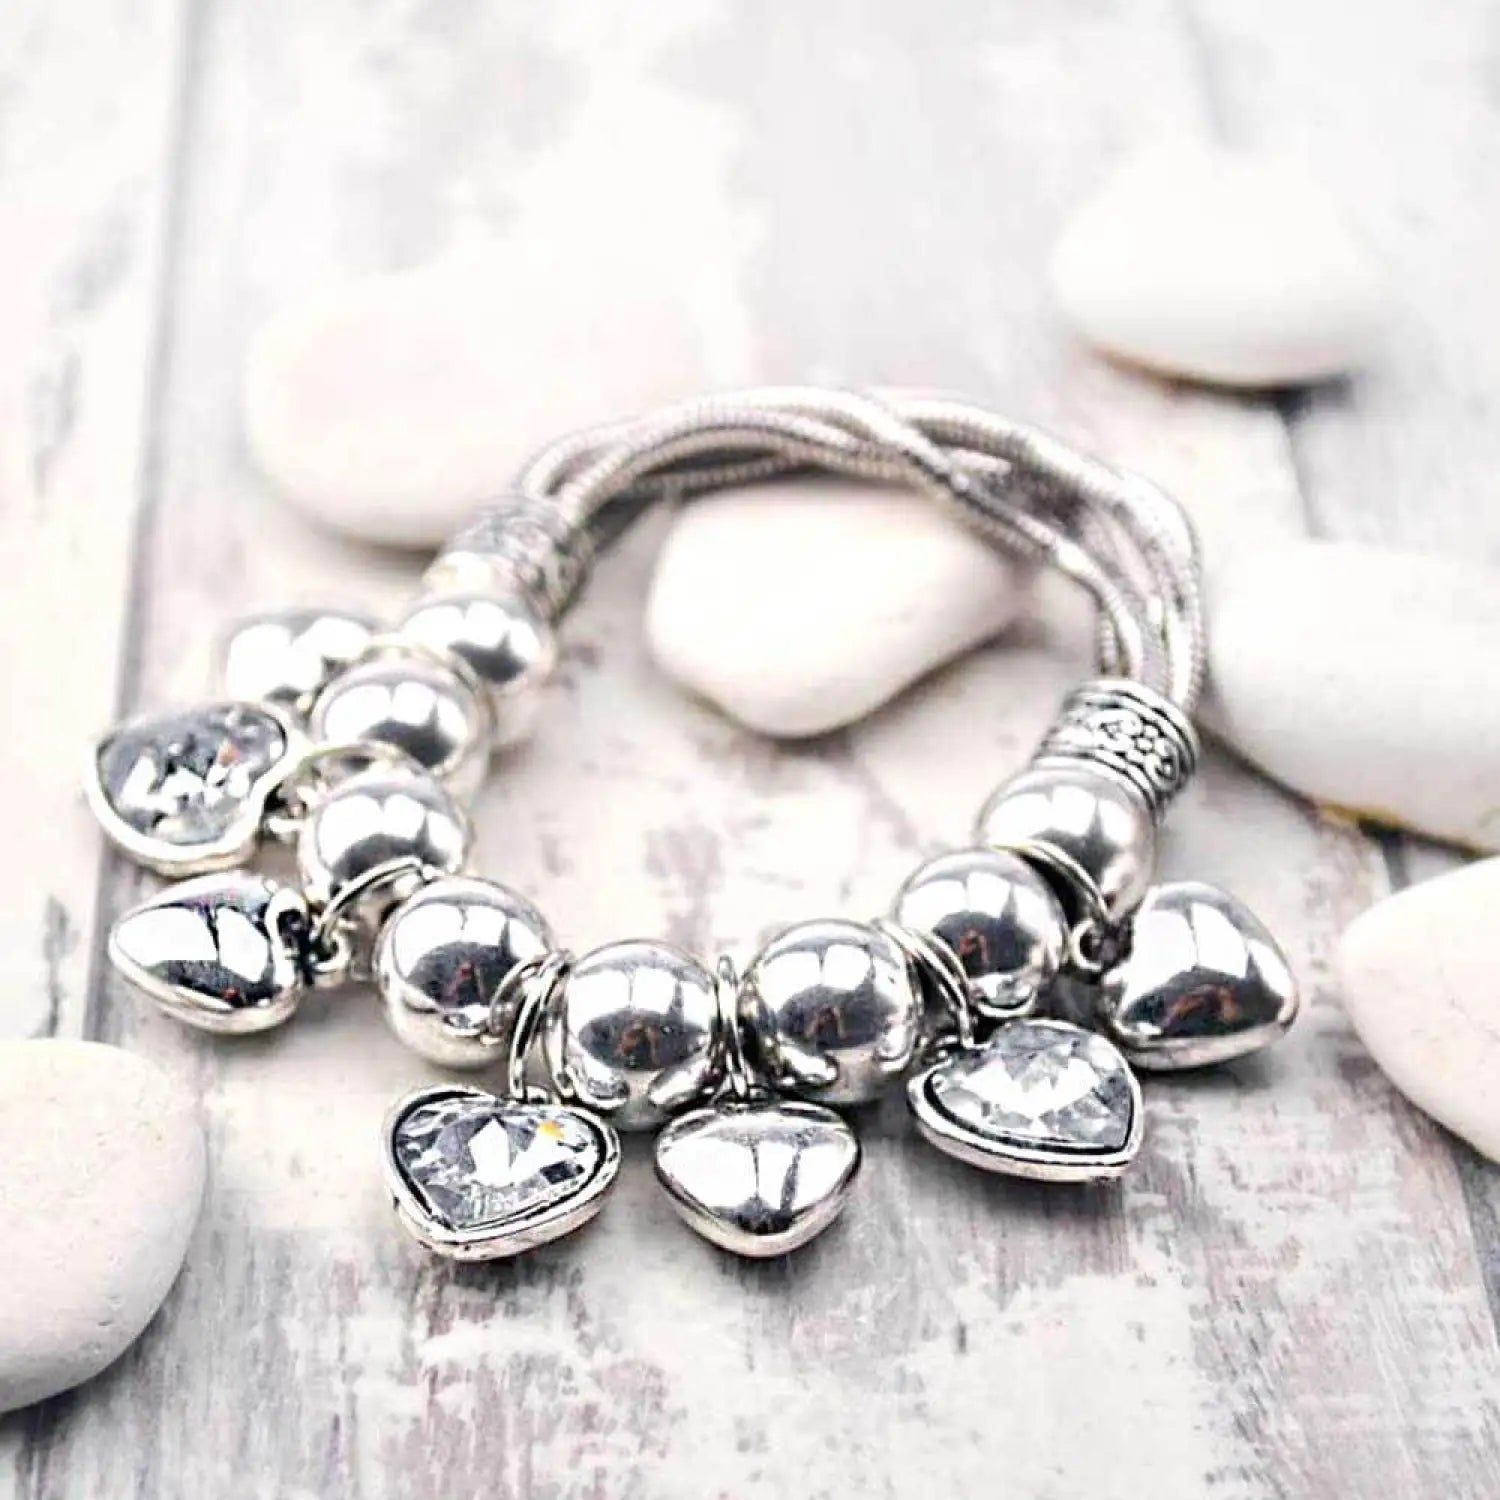 Silver elasticated bracelet with rhinestone heart charm, statement chunky accessory